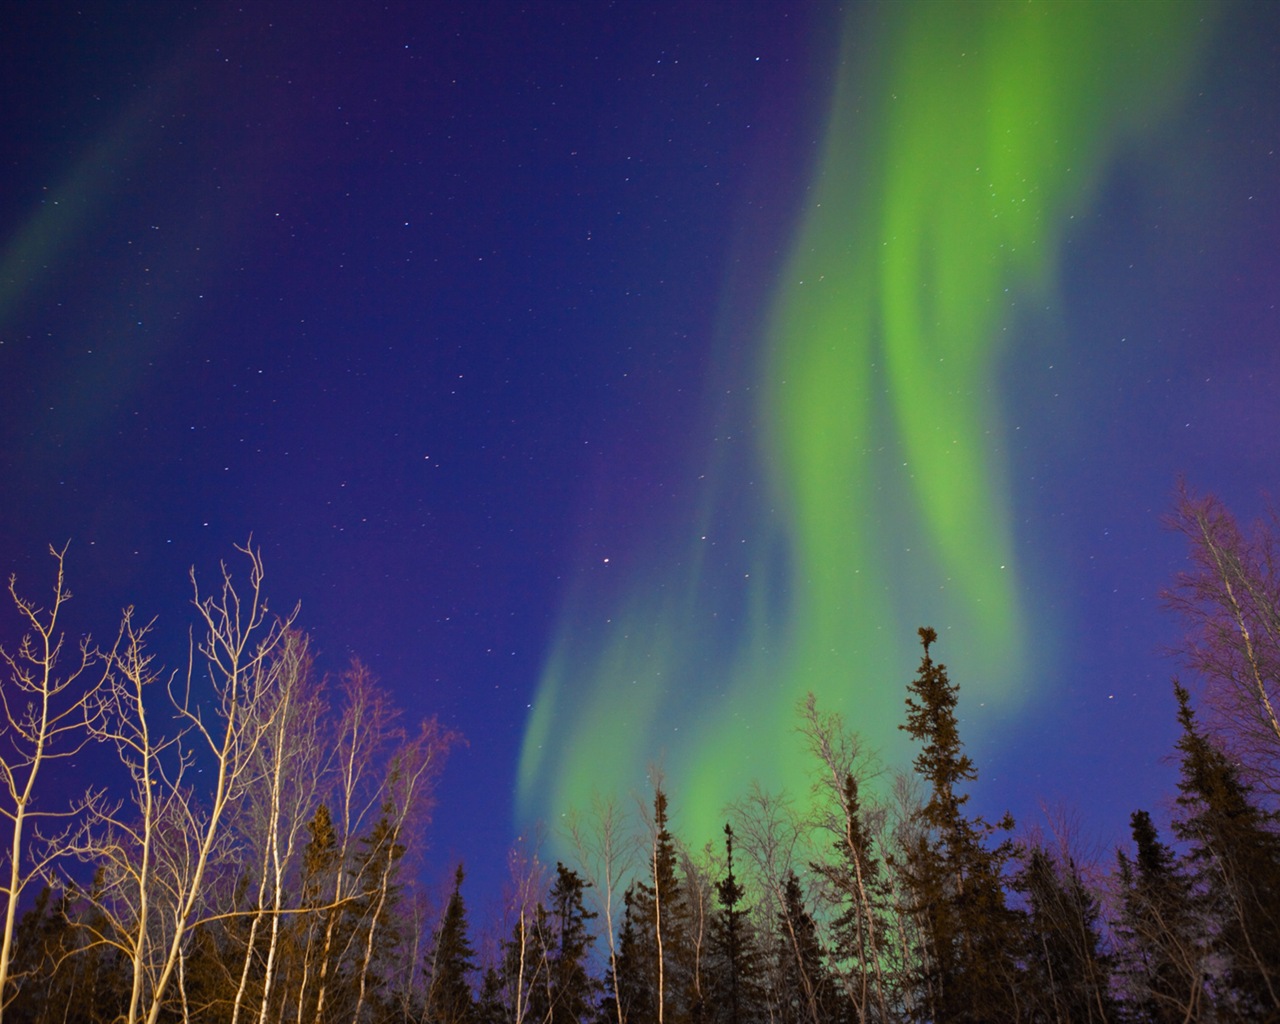 Natural wonders of the Northern Lights HD Wallpaper (2) #20 - 1280x1024